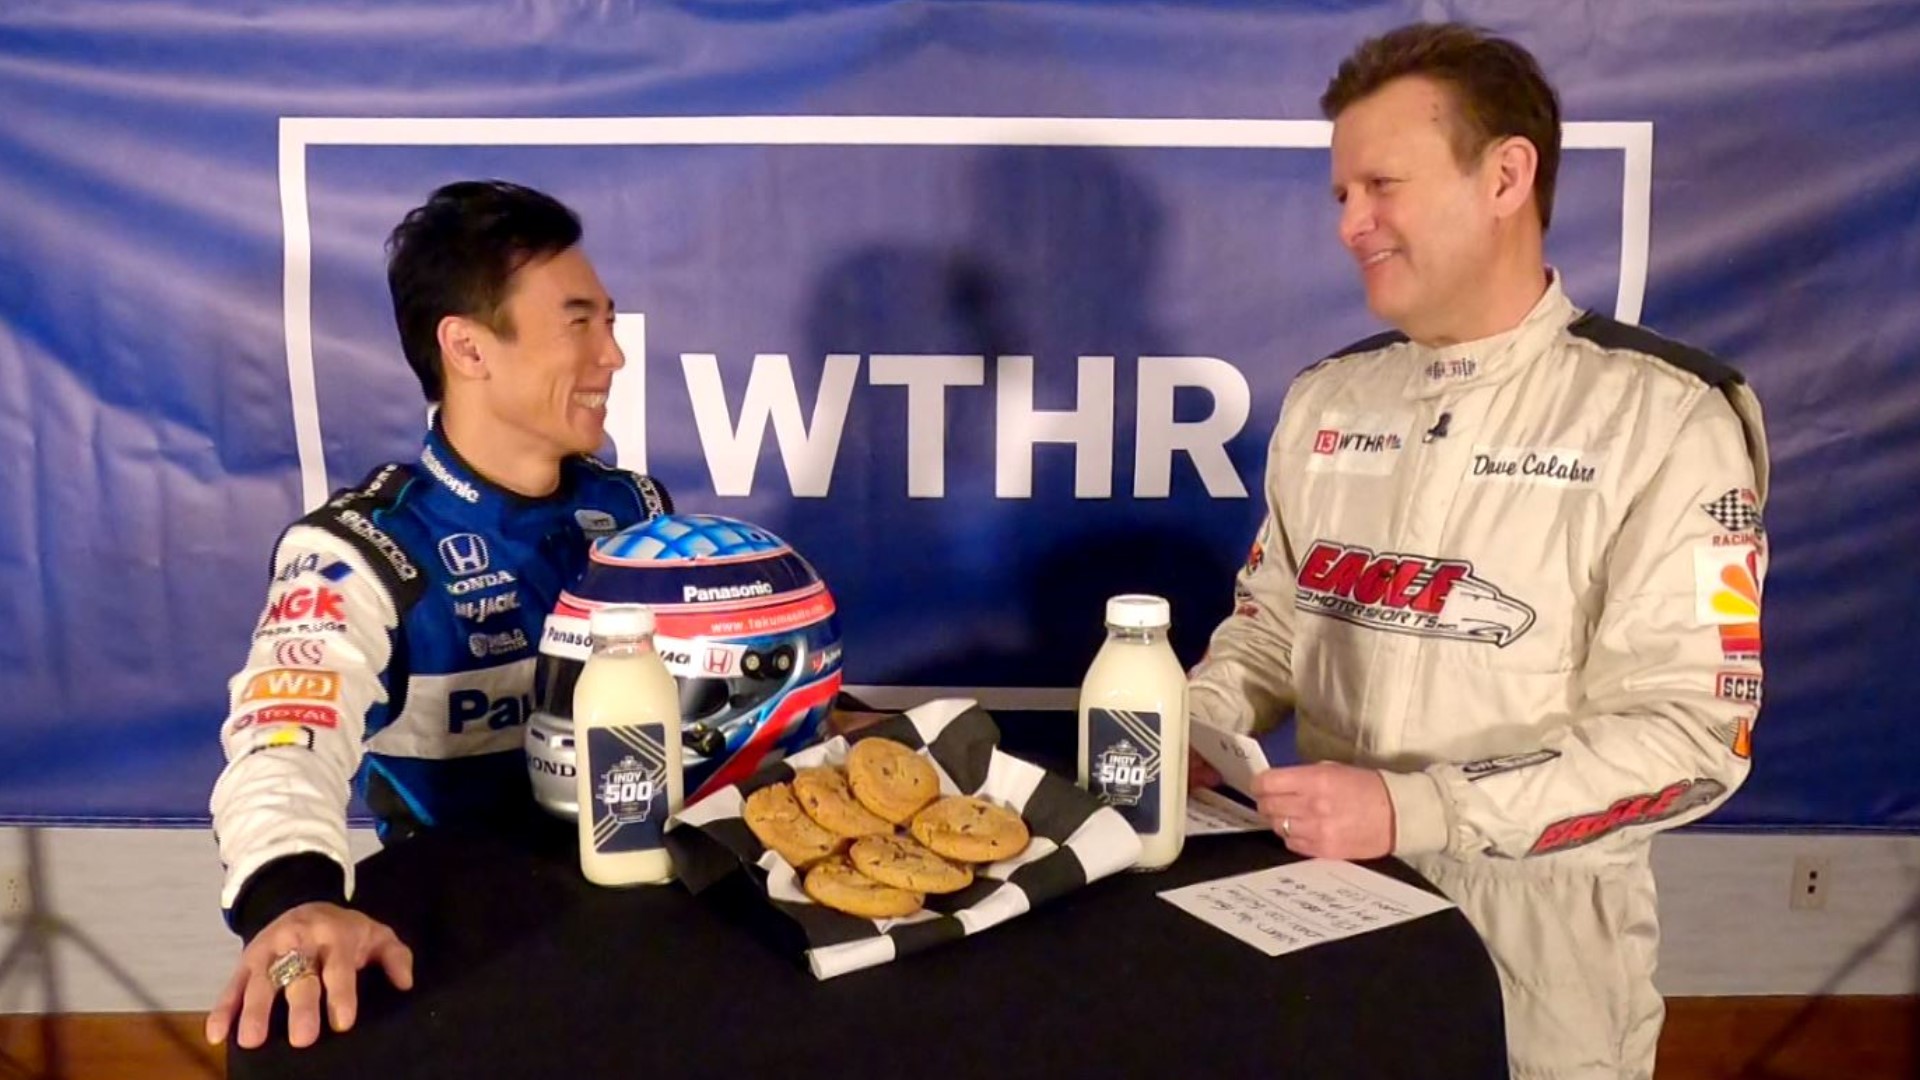 From impressions of each other to their social media flow and pandemic binge watching, Dave Calabro gets the dirt from IndyCar drivers.